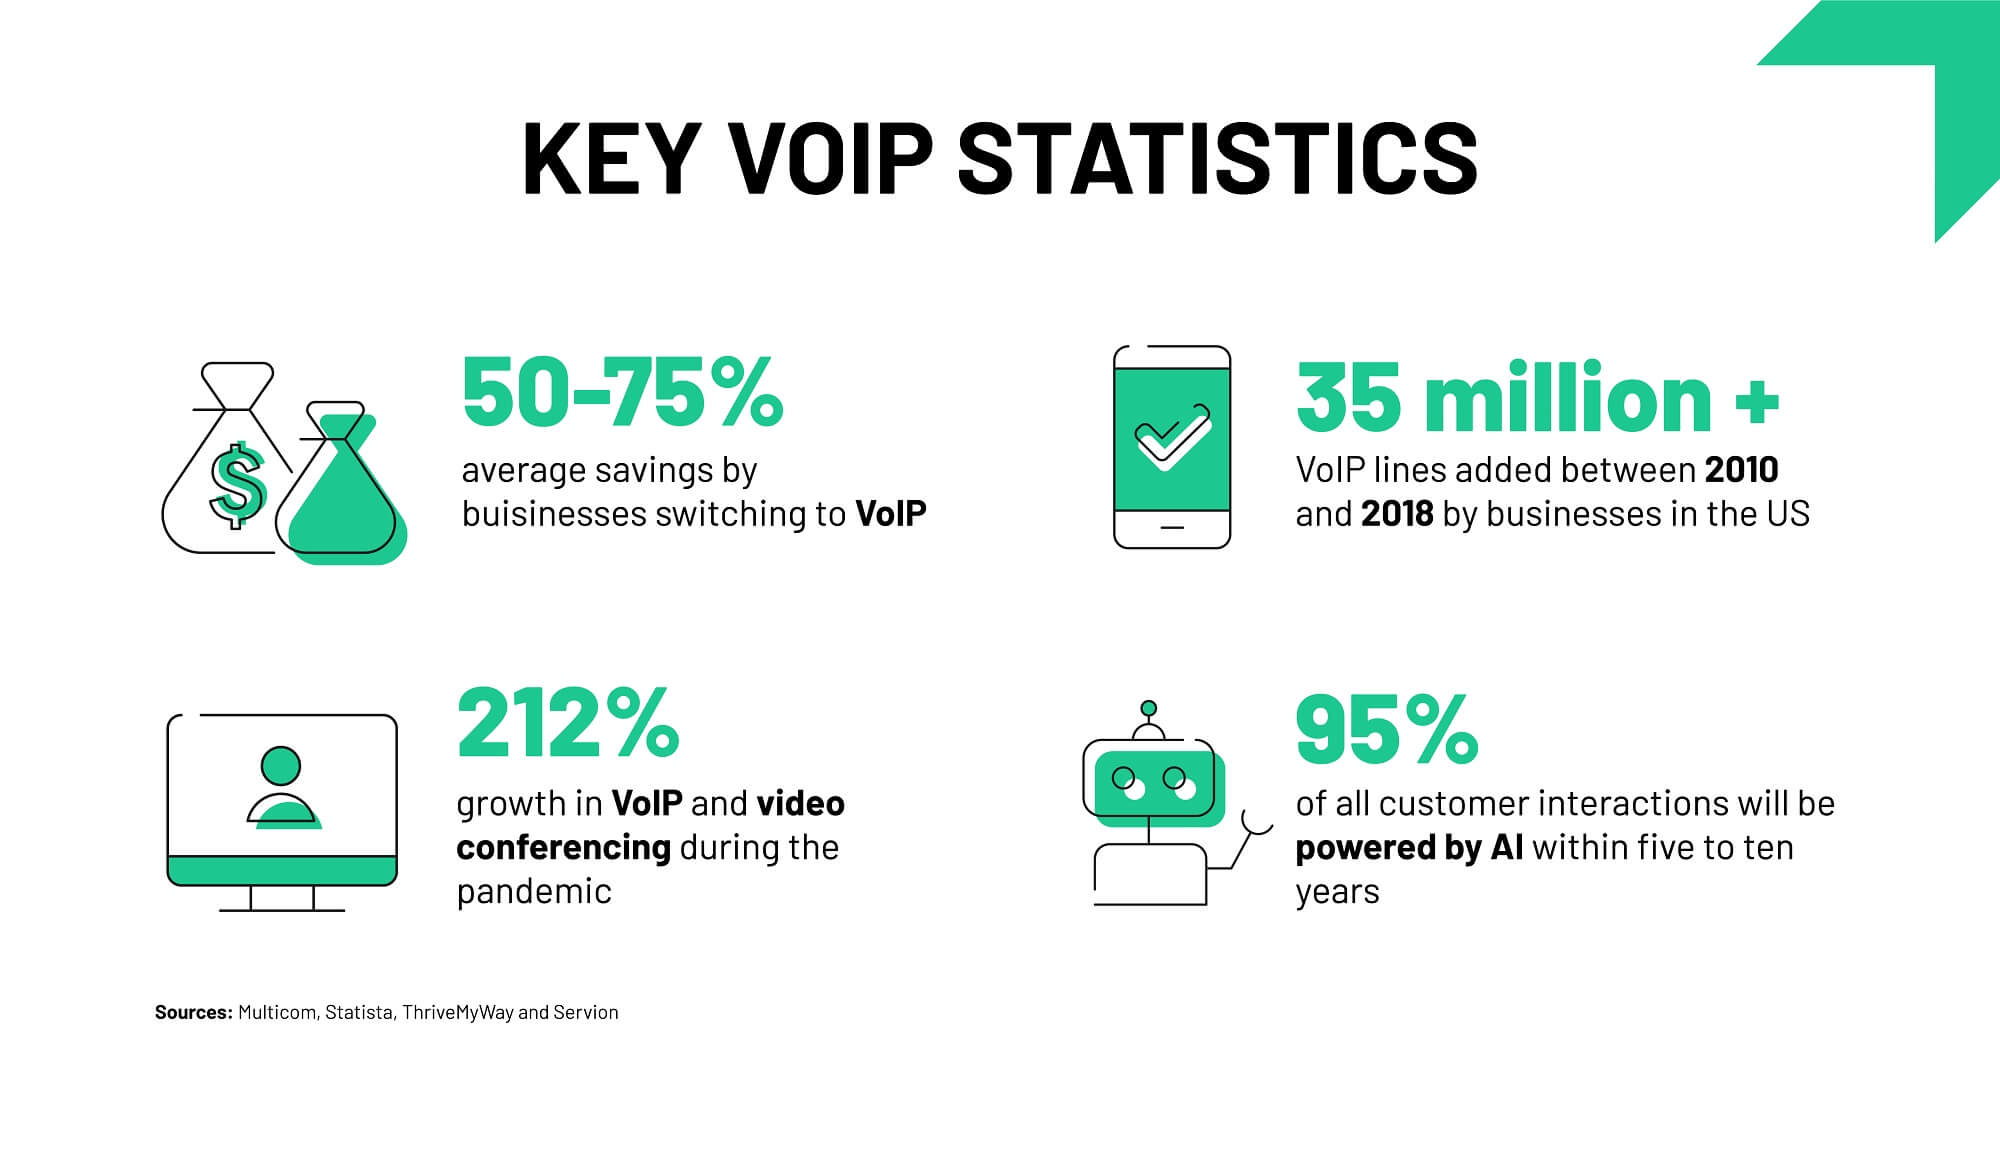 Key VoIP stats infographic